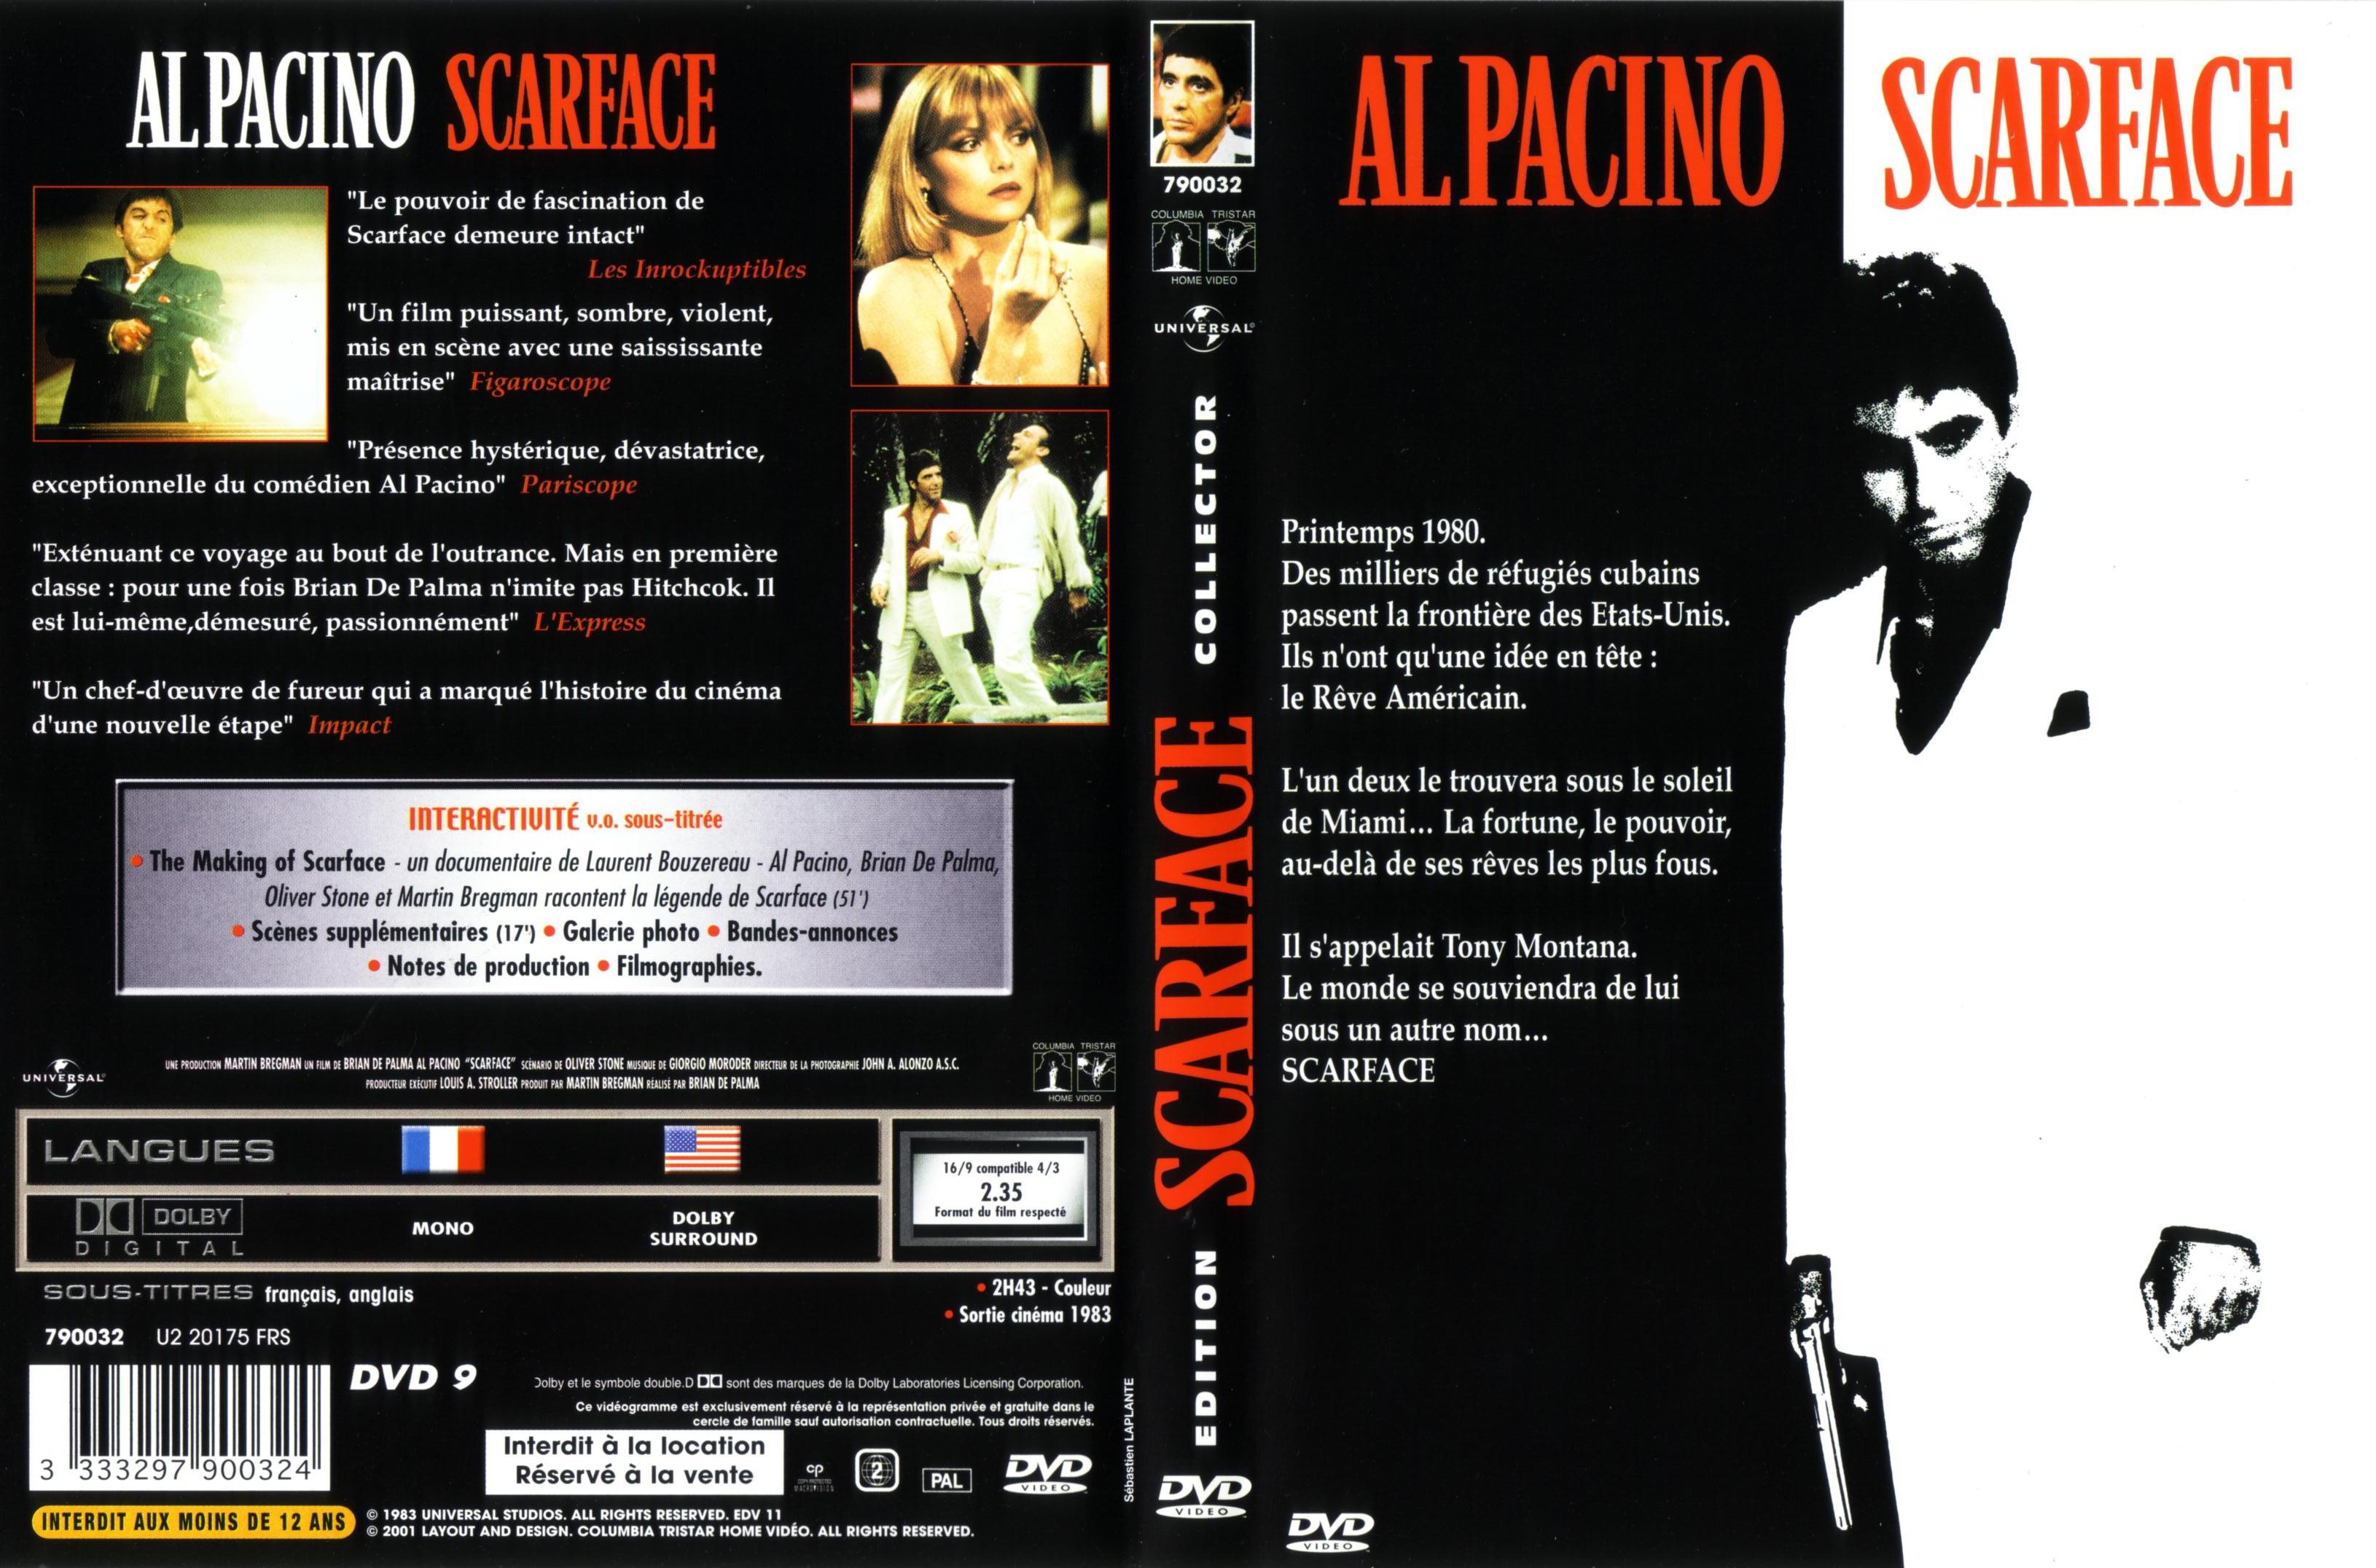 Jaquette DVD Scarface